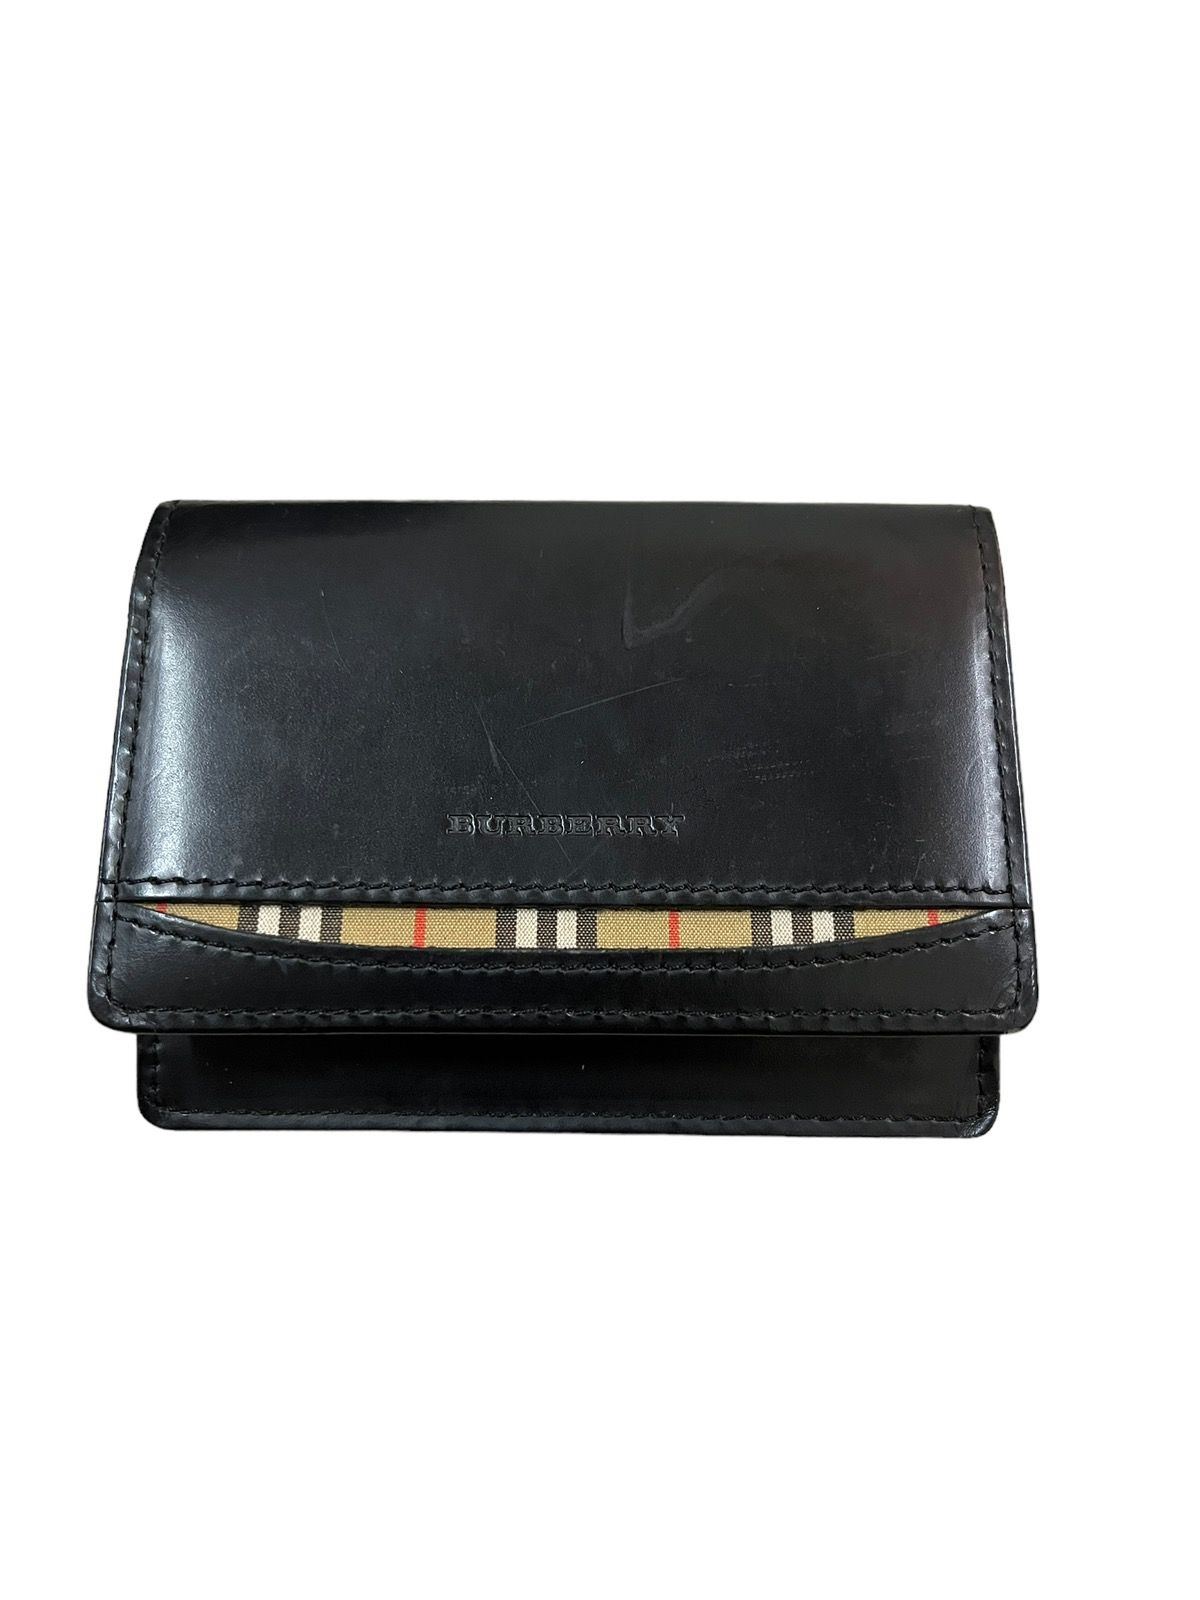 Burberry Leather Wallet Card Holder - 1